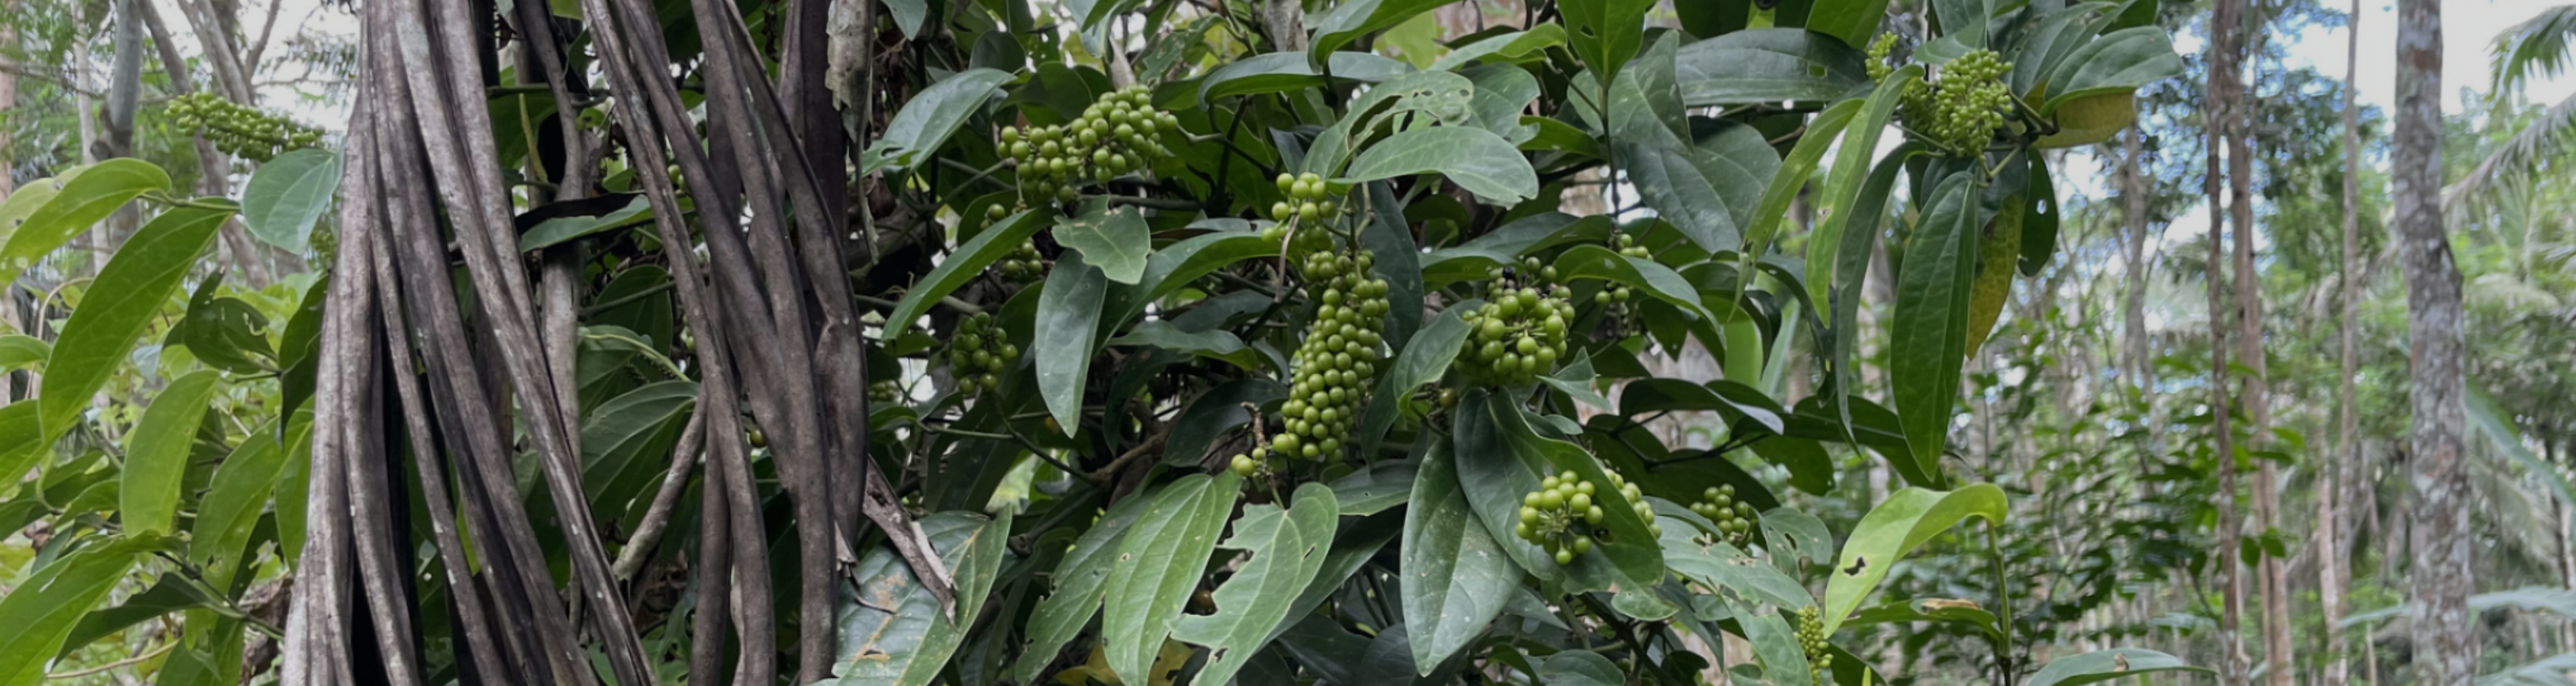 Natural Origins and its cubeb pepper supply chain in Indonesia